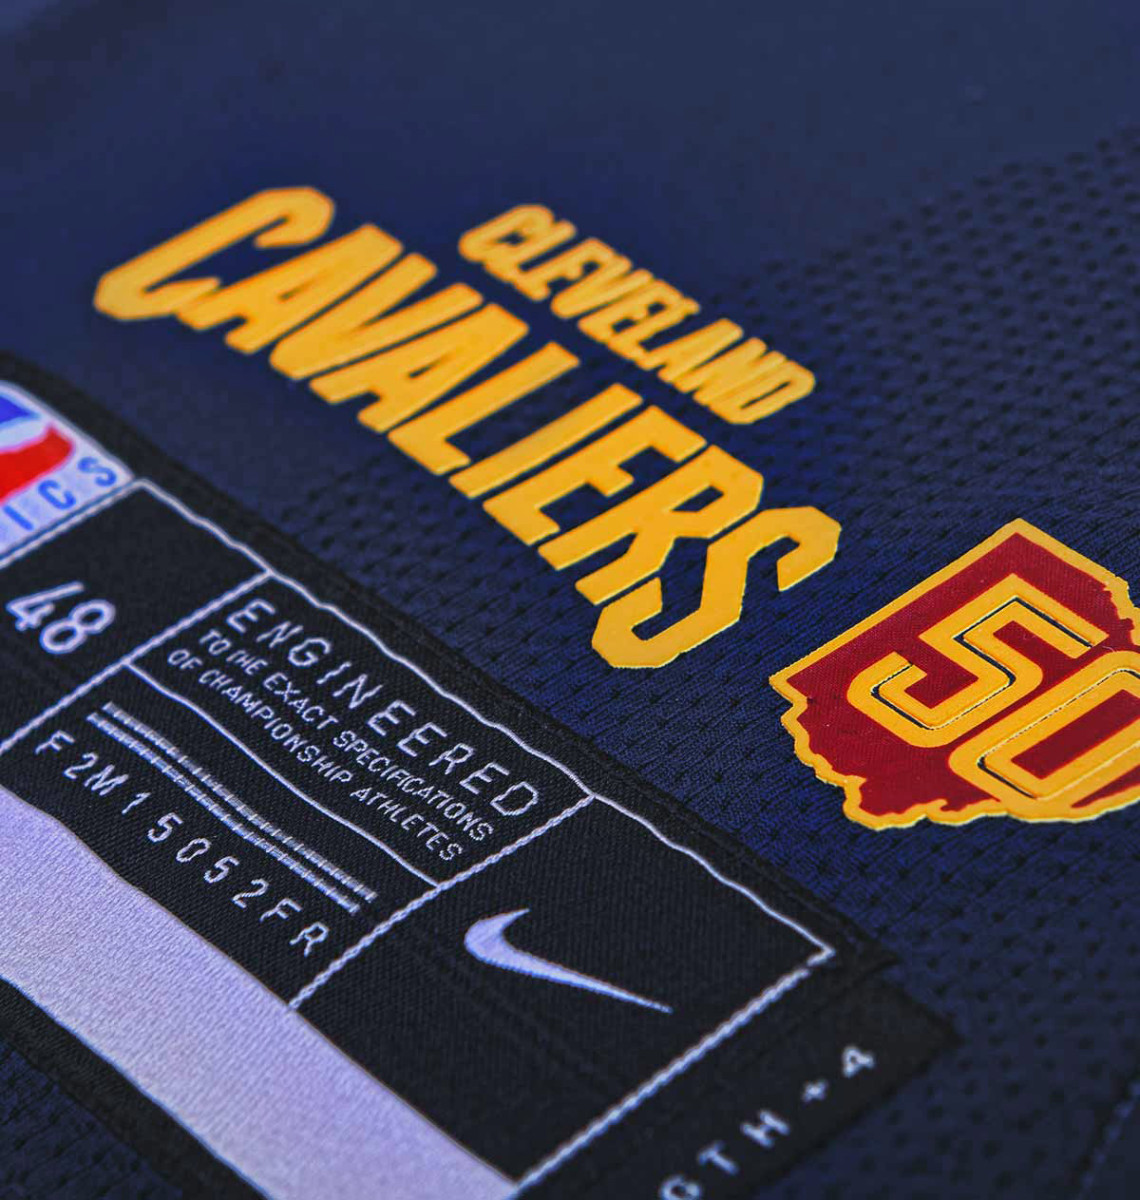 Photos: Cleveland Cavaliers unveil new City Edition jersey